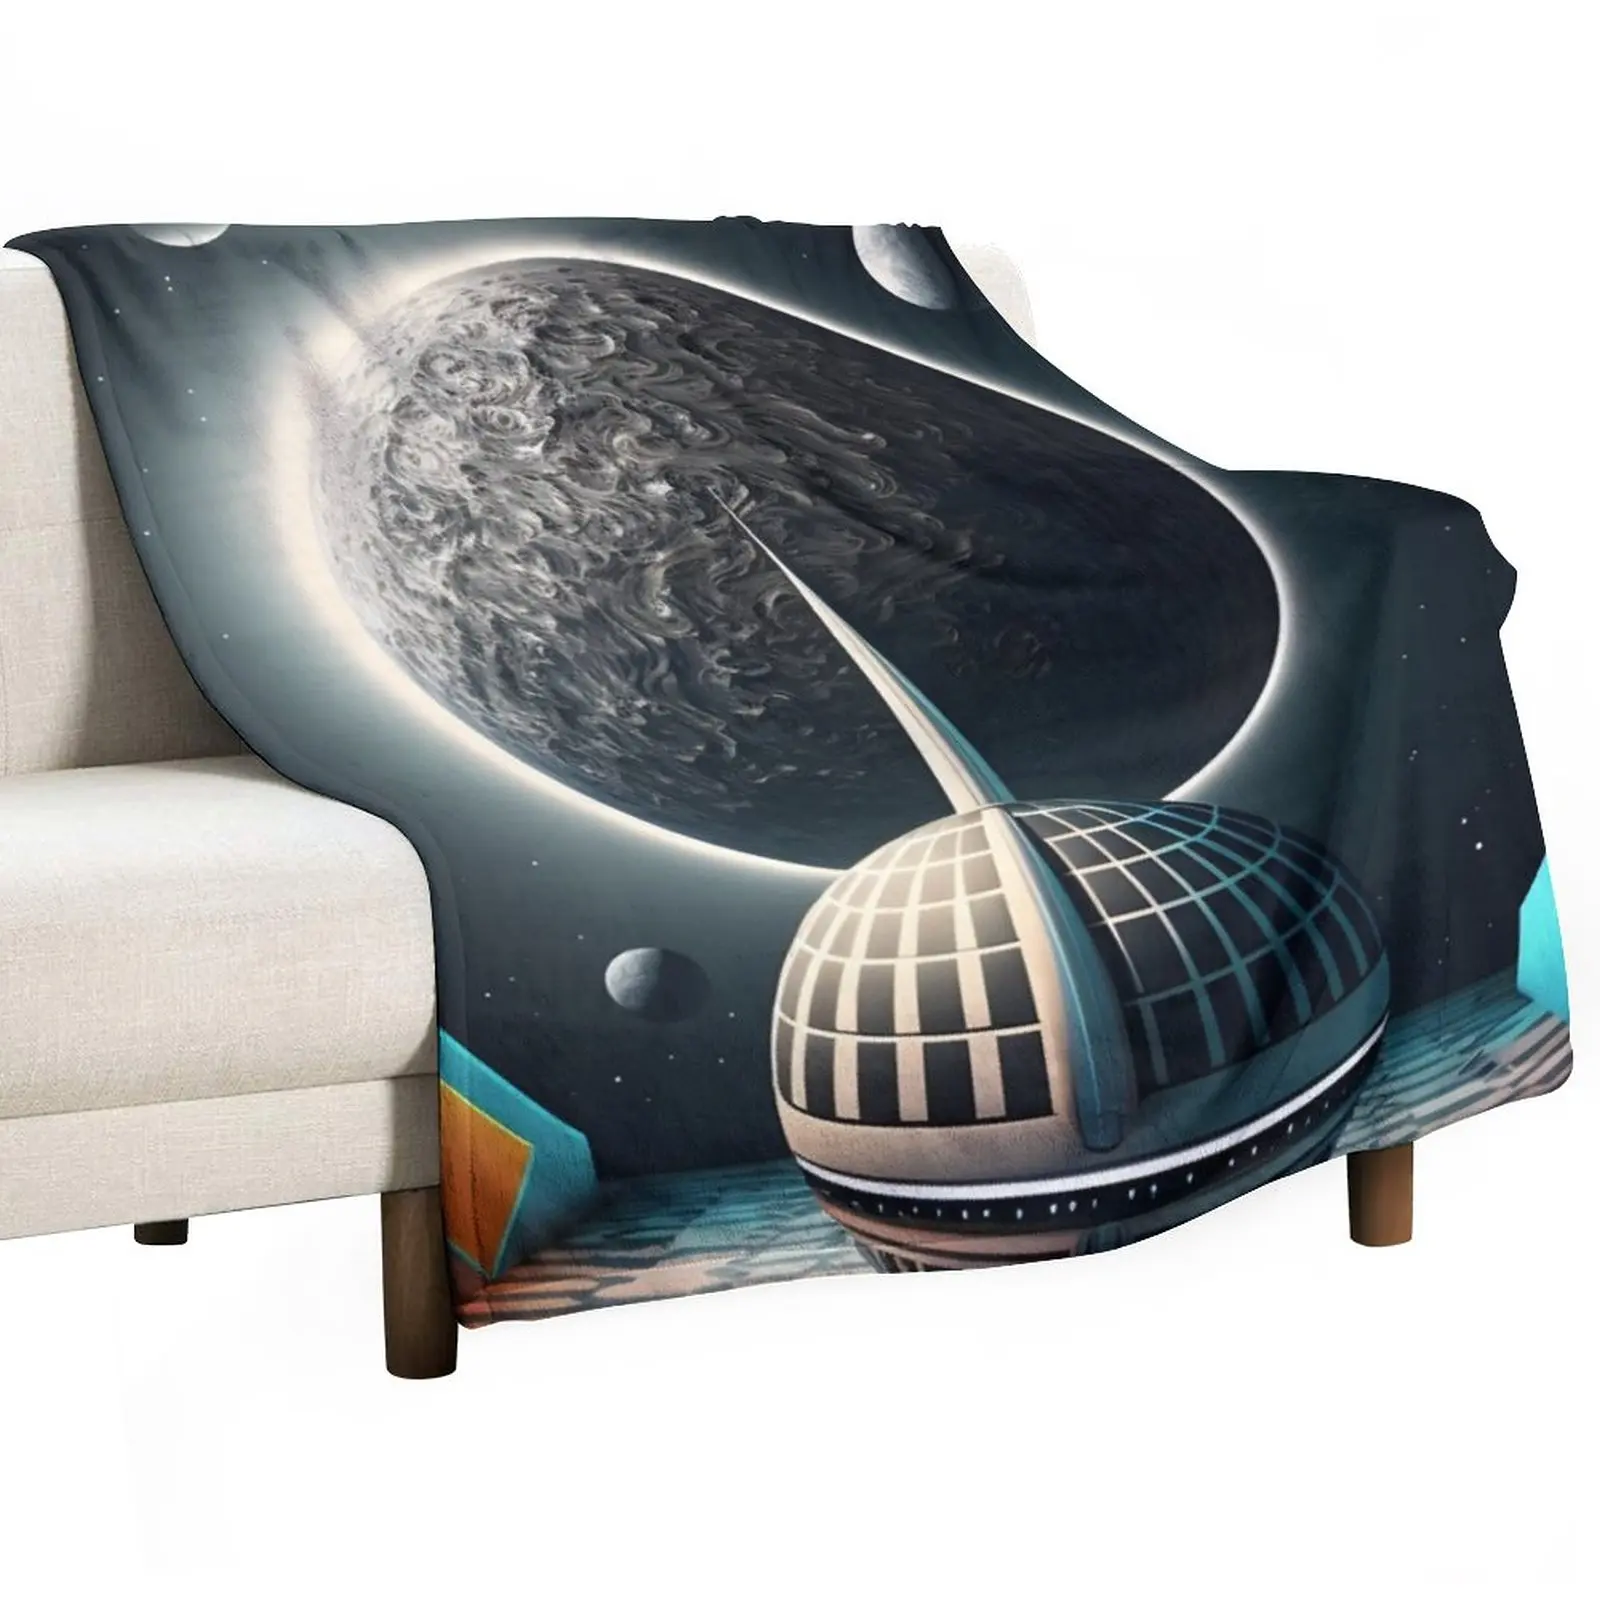 

New Deco Spaceship landing In Planet X232's Space Port Throw Blanket Sleeping Bag Bed Fashionable funny gift Blankets